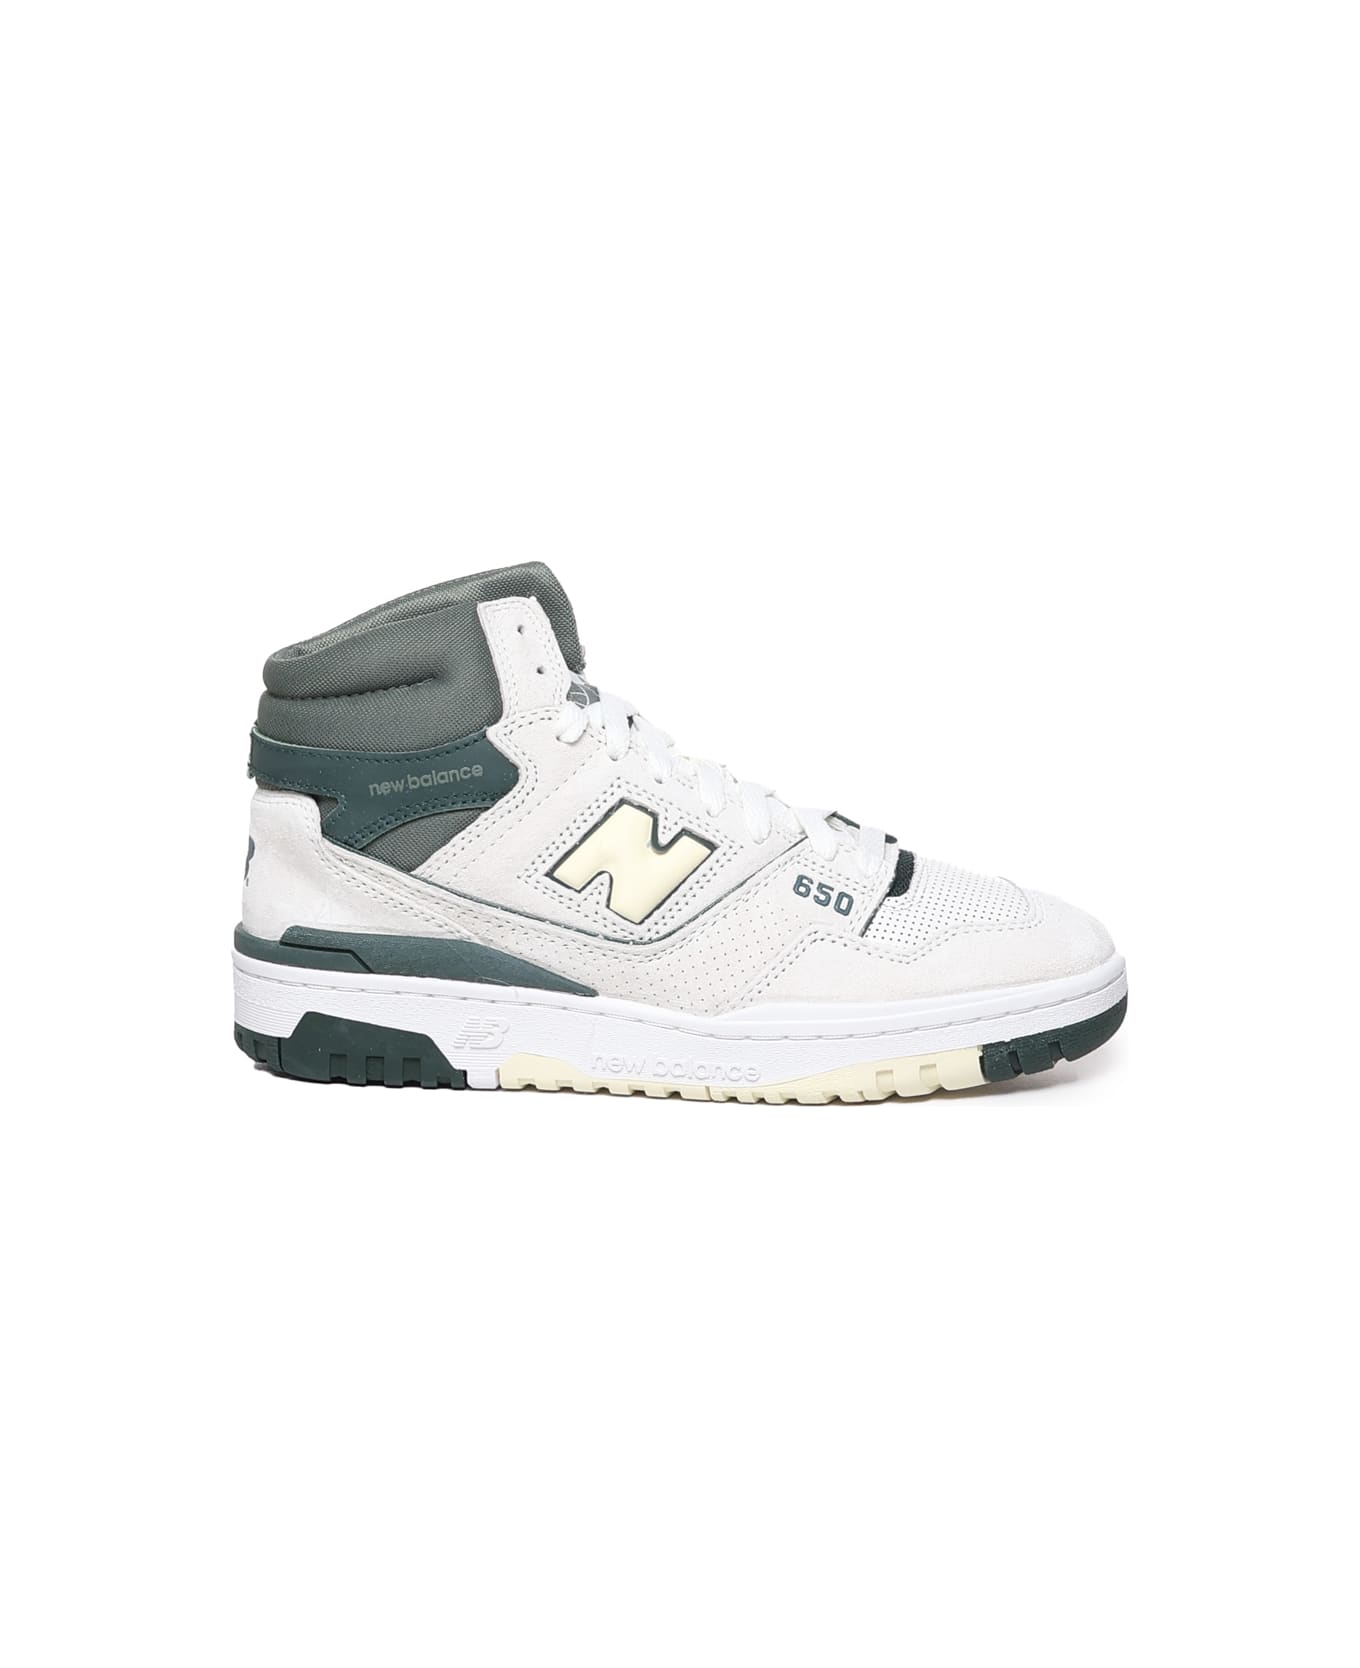 New Balance 650 High Sneakers - White